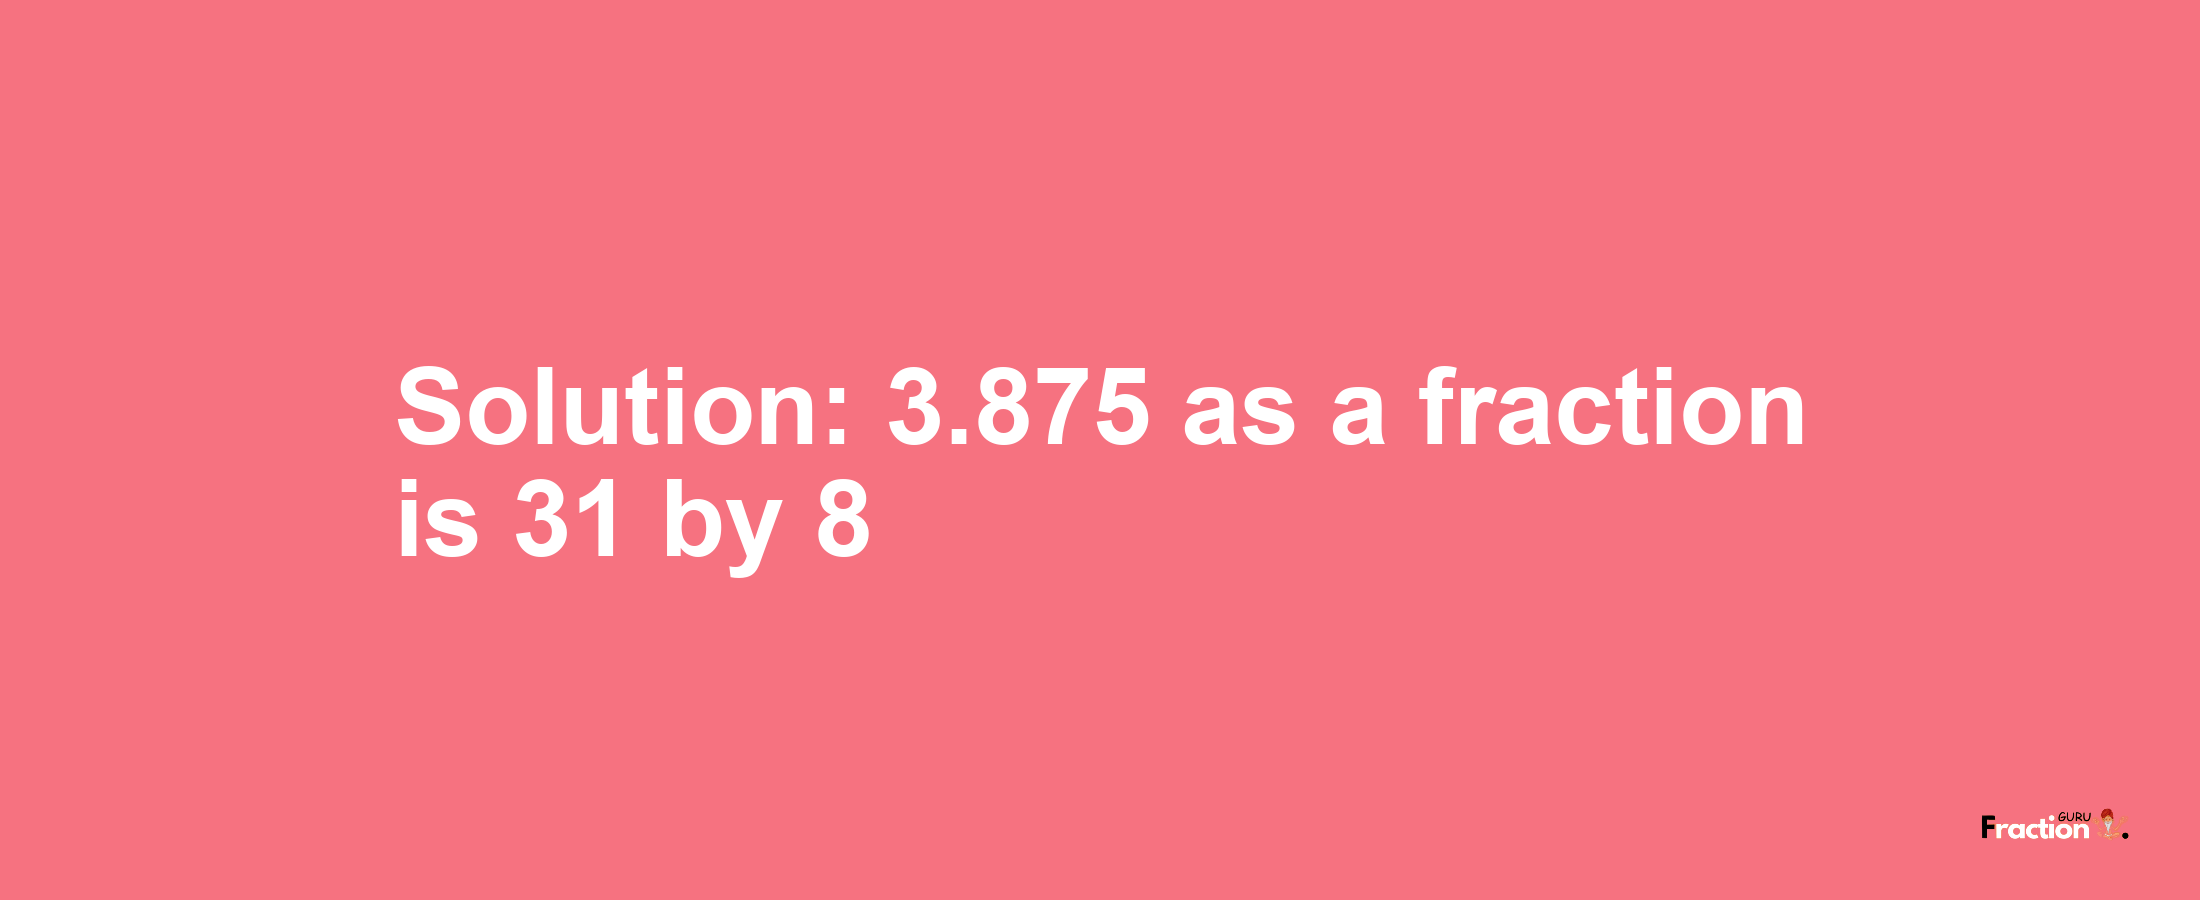 Solution:3.875 as a fraction is 31/8